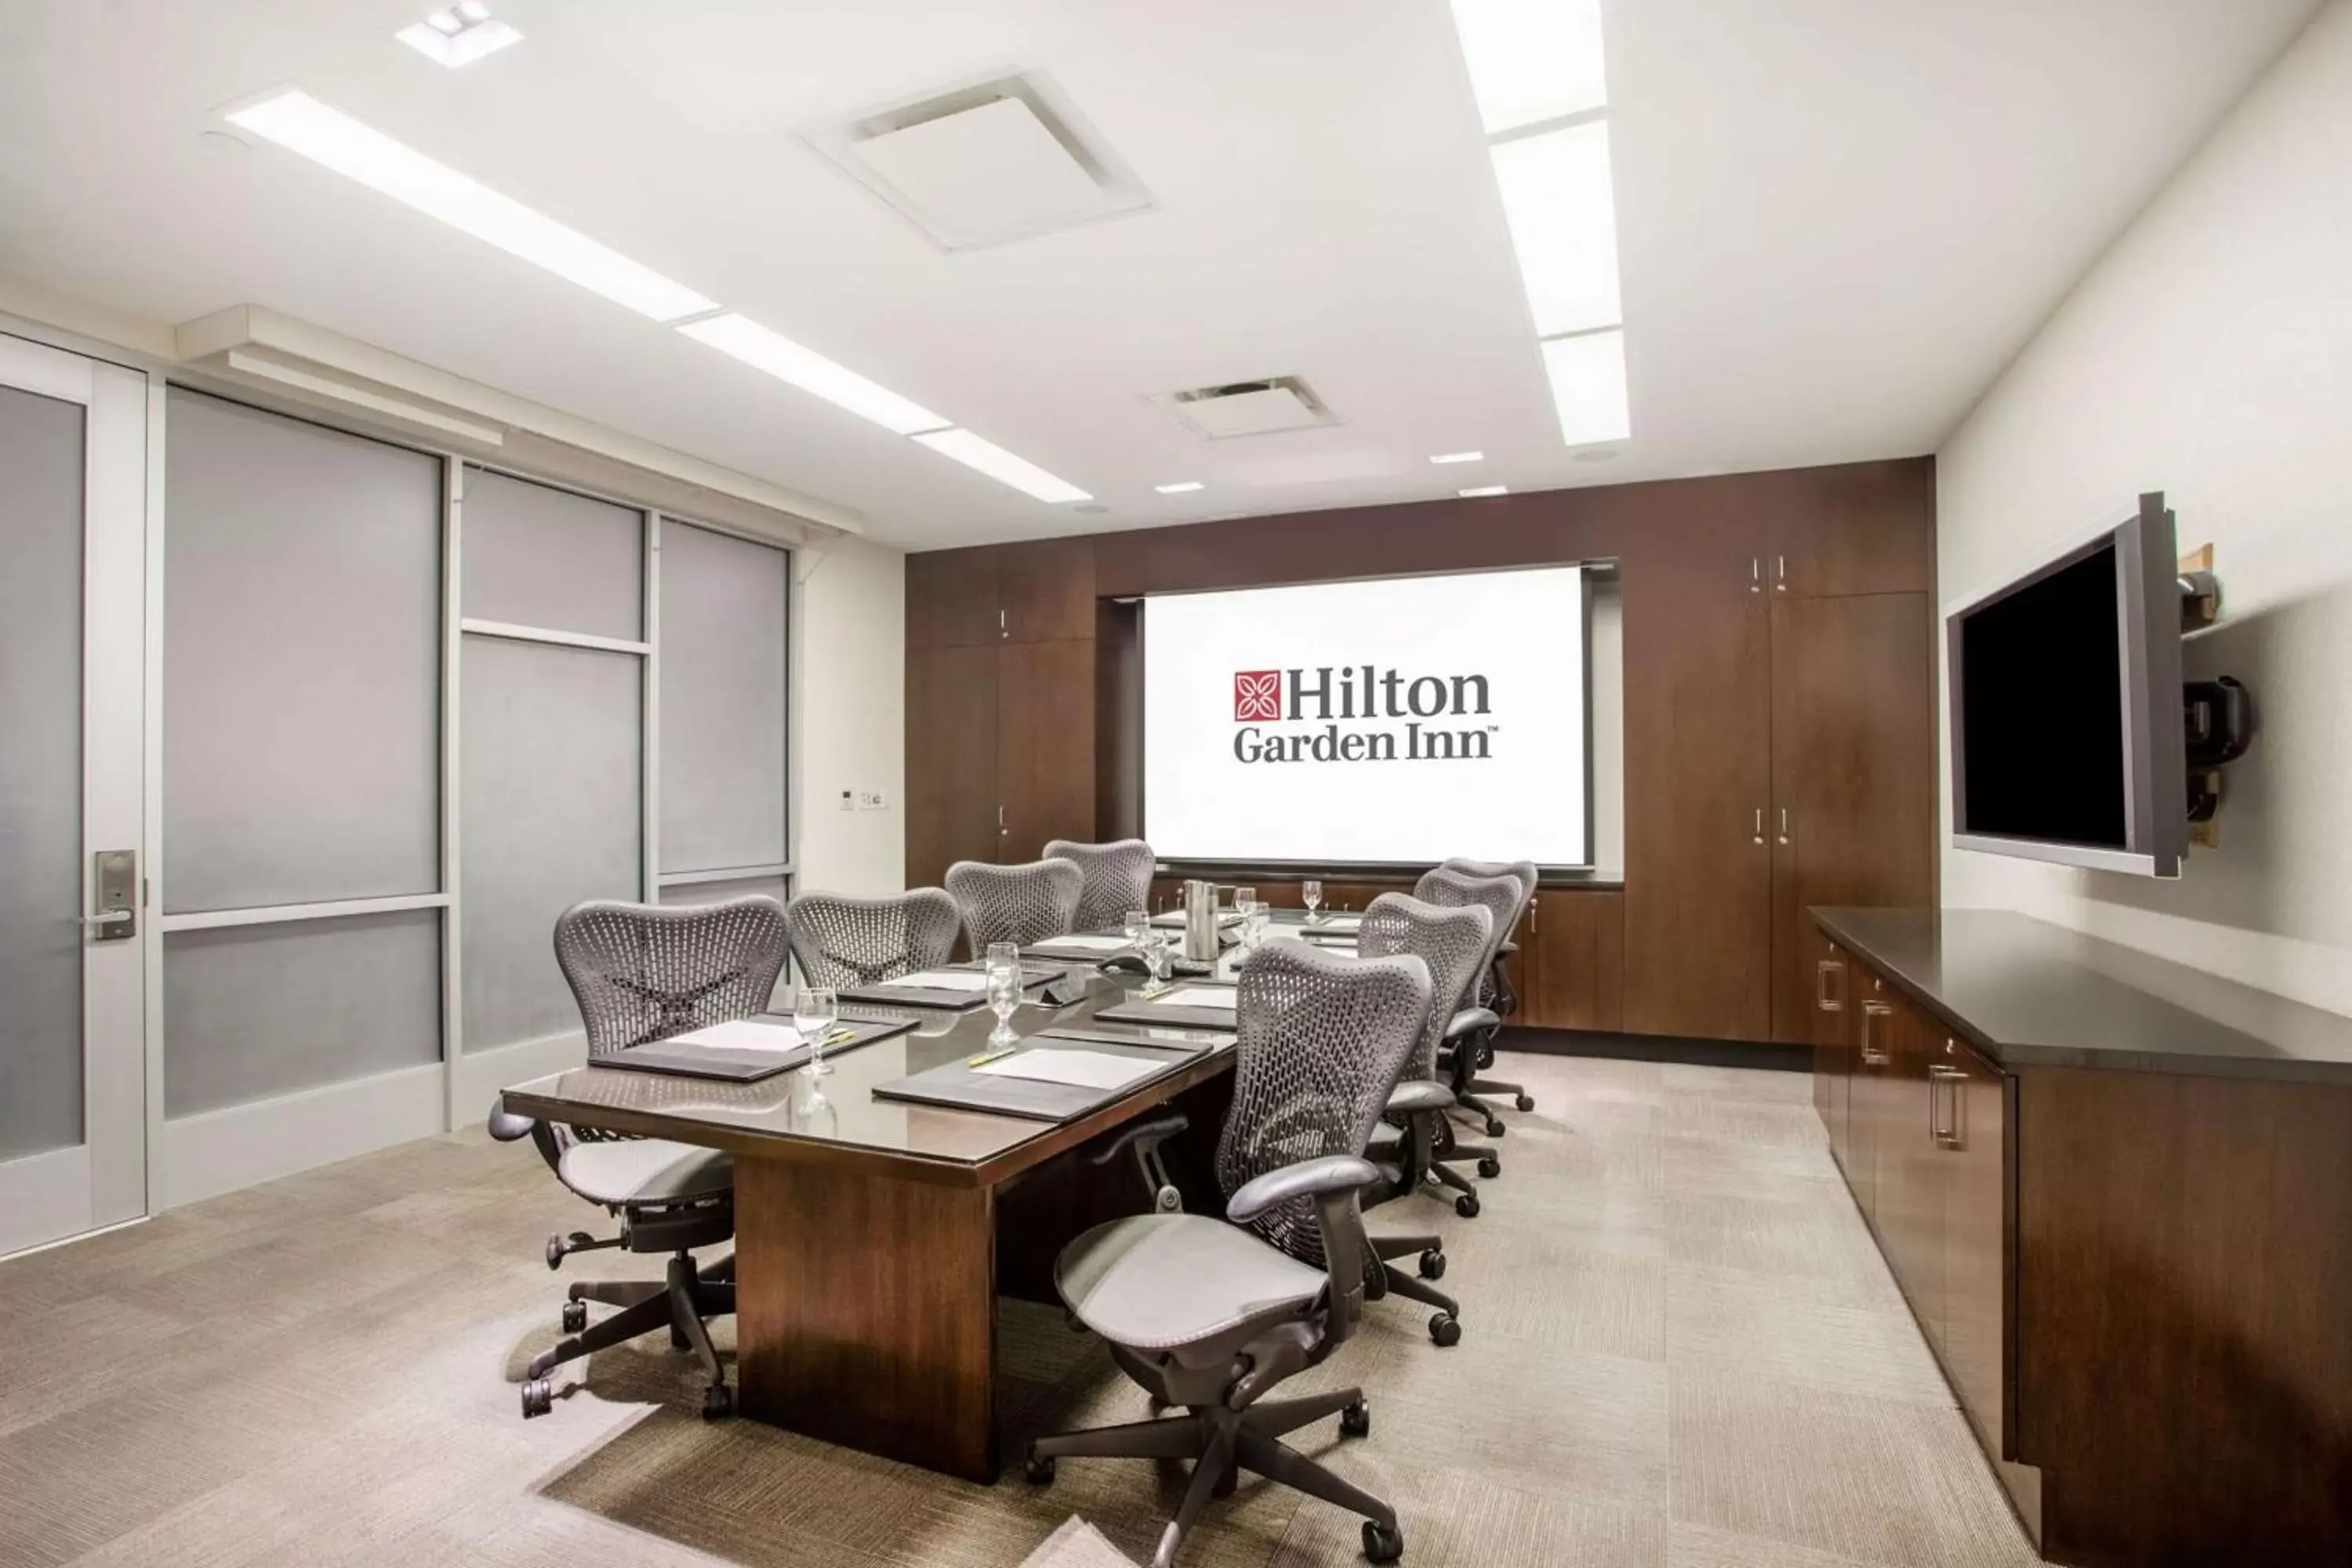 Meeting/conference room in Hilton Garden Inn West 35th Street